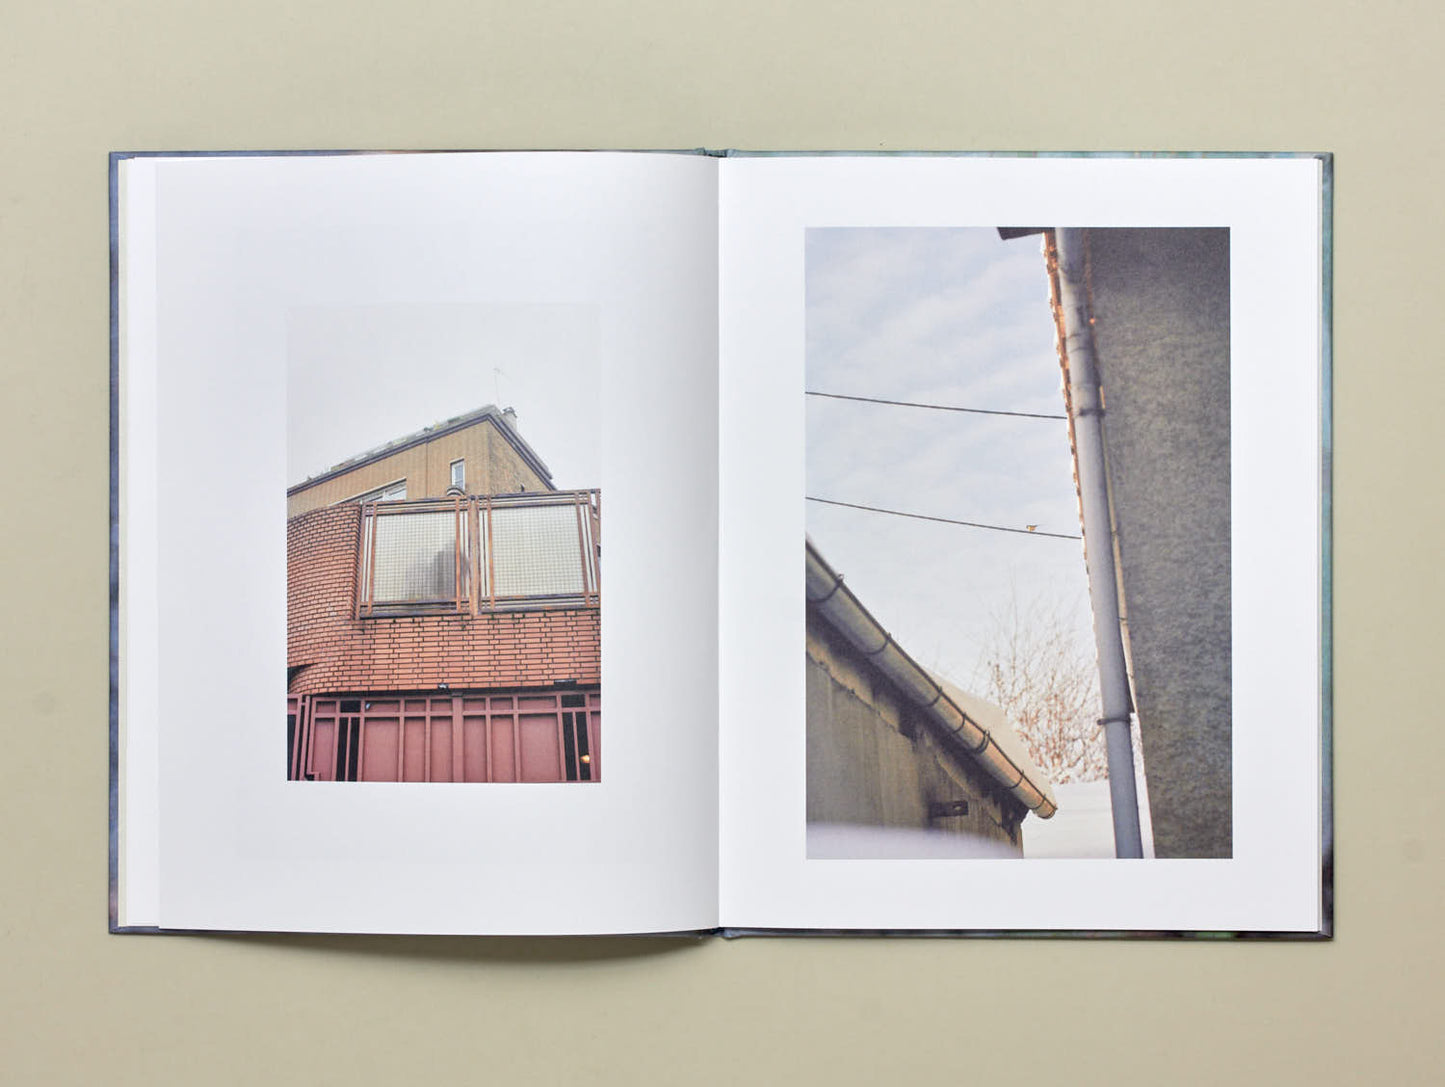 Ola Rindal, Notes on Ordinary Spaces